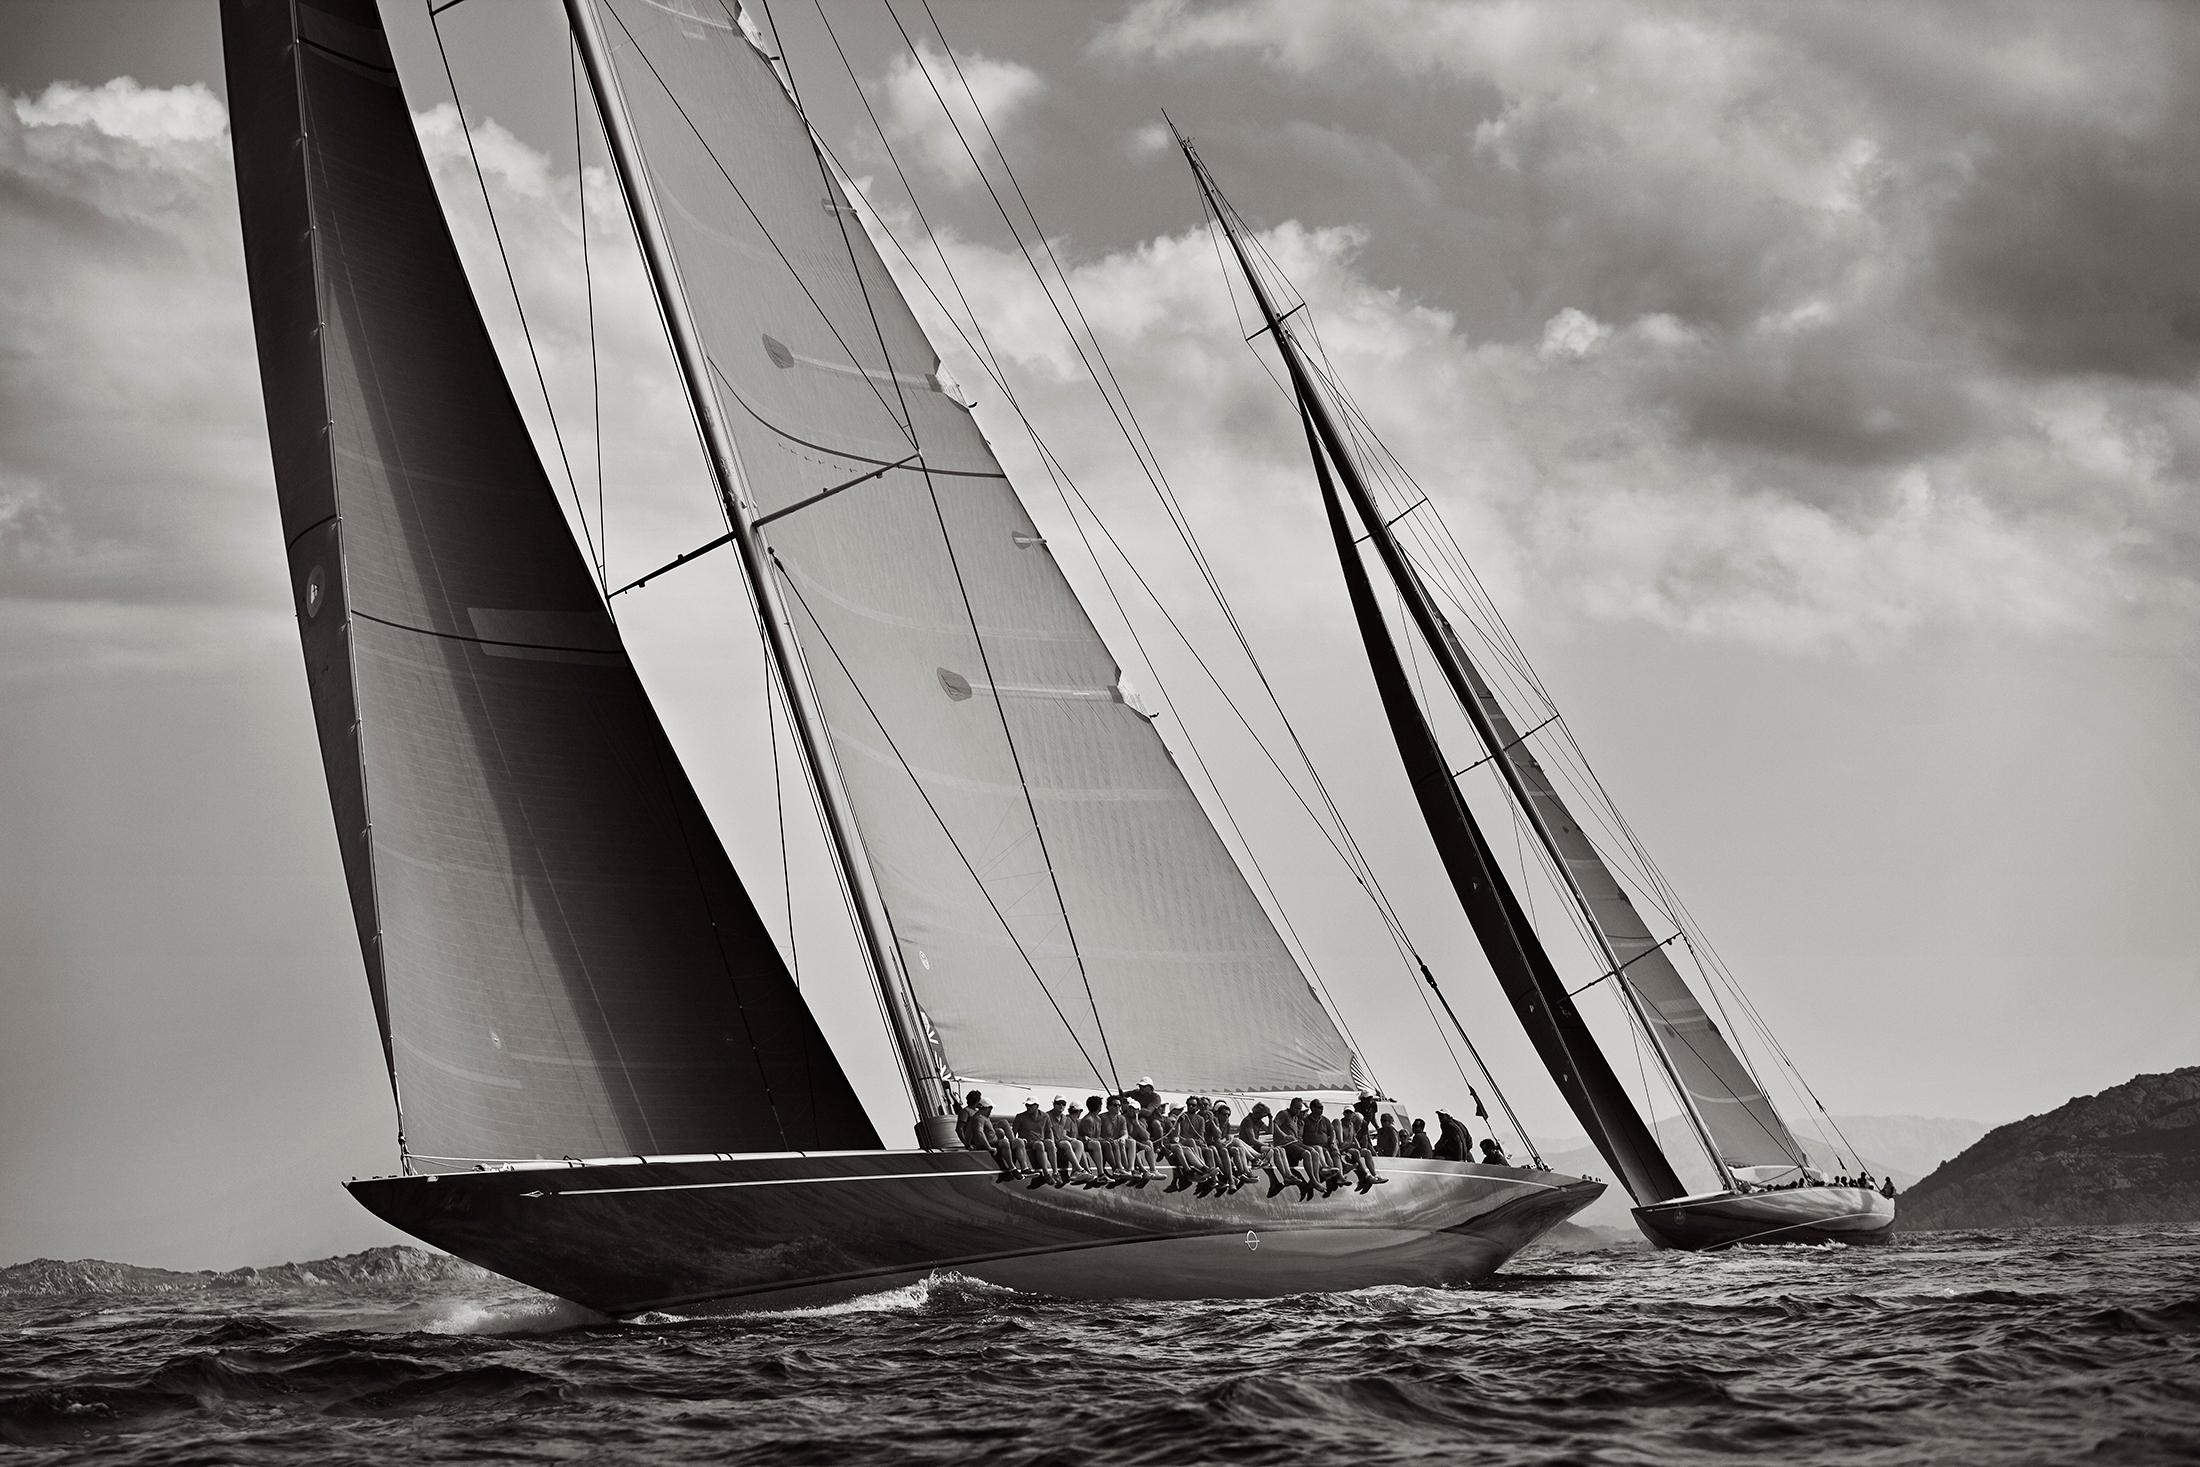 Drew Doggett Black and White Photograph - World Class Racing Yachts in Italy, Nautical, Horizontal, Iconic